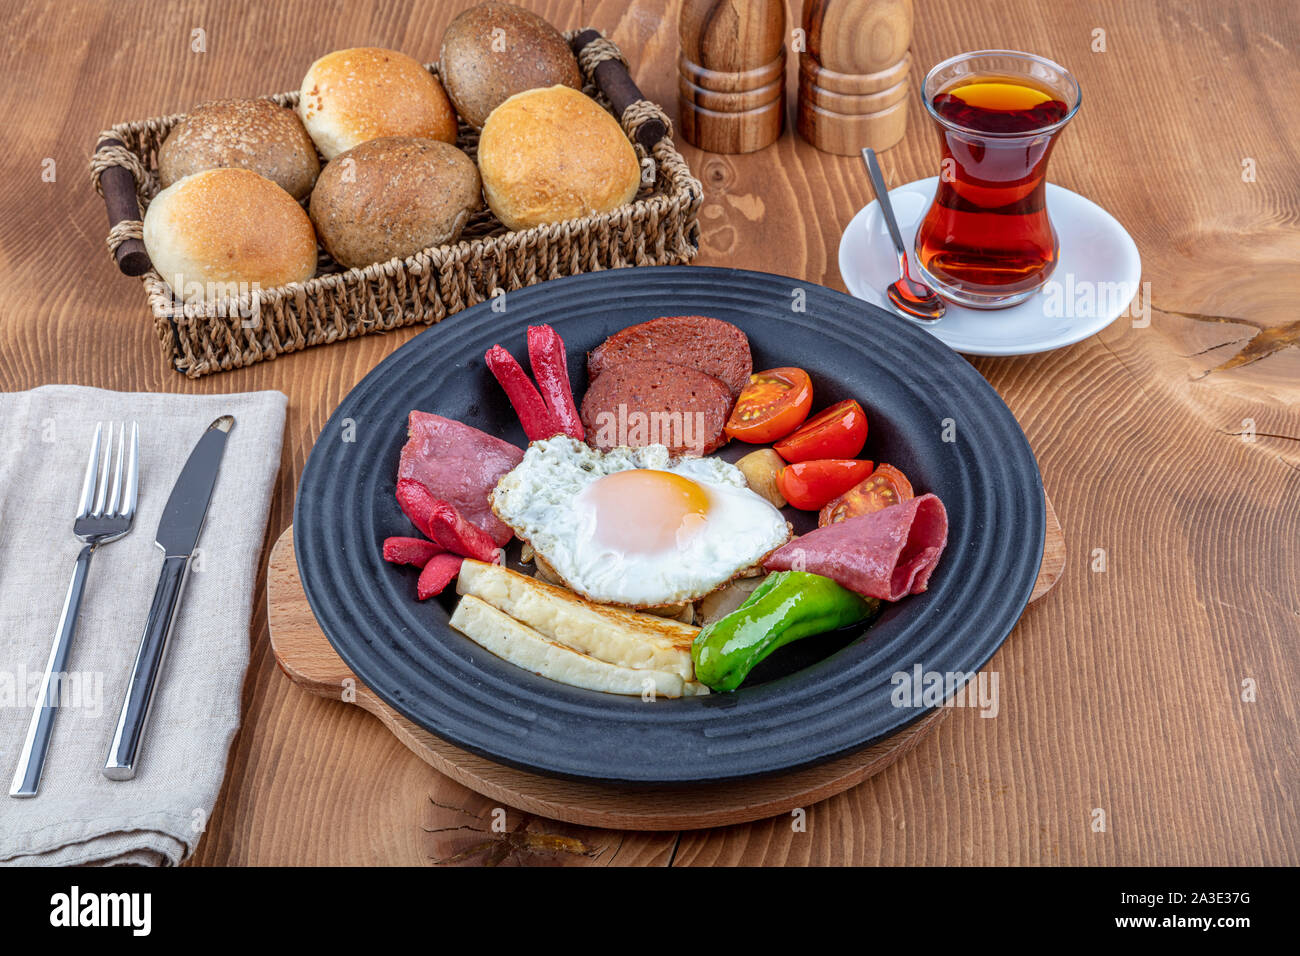 Delicious hot breakfast platter; Sausage, salami, pepper, tomato, fried hellim cheese. Restorant breakfast concept on wooden table. Stock Photo